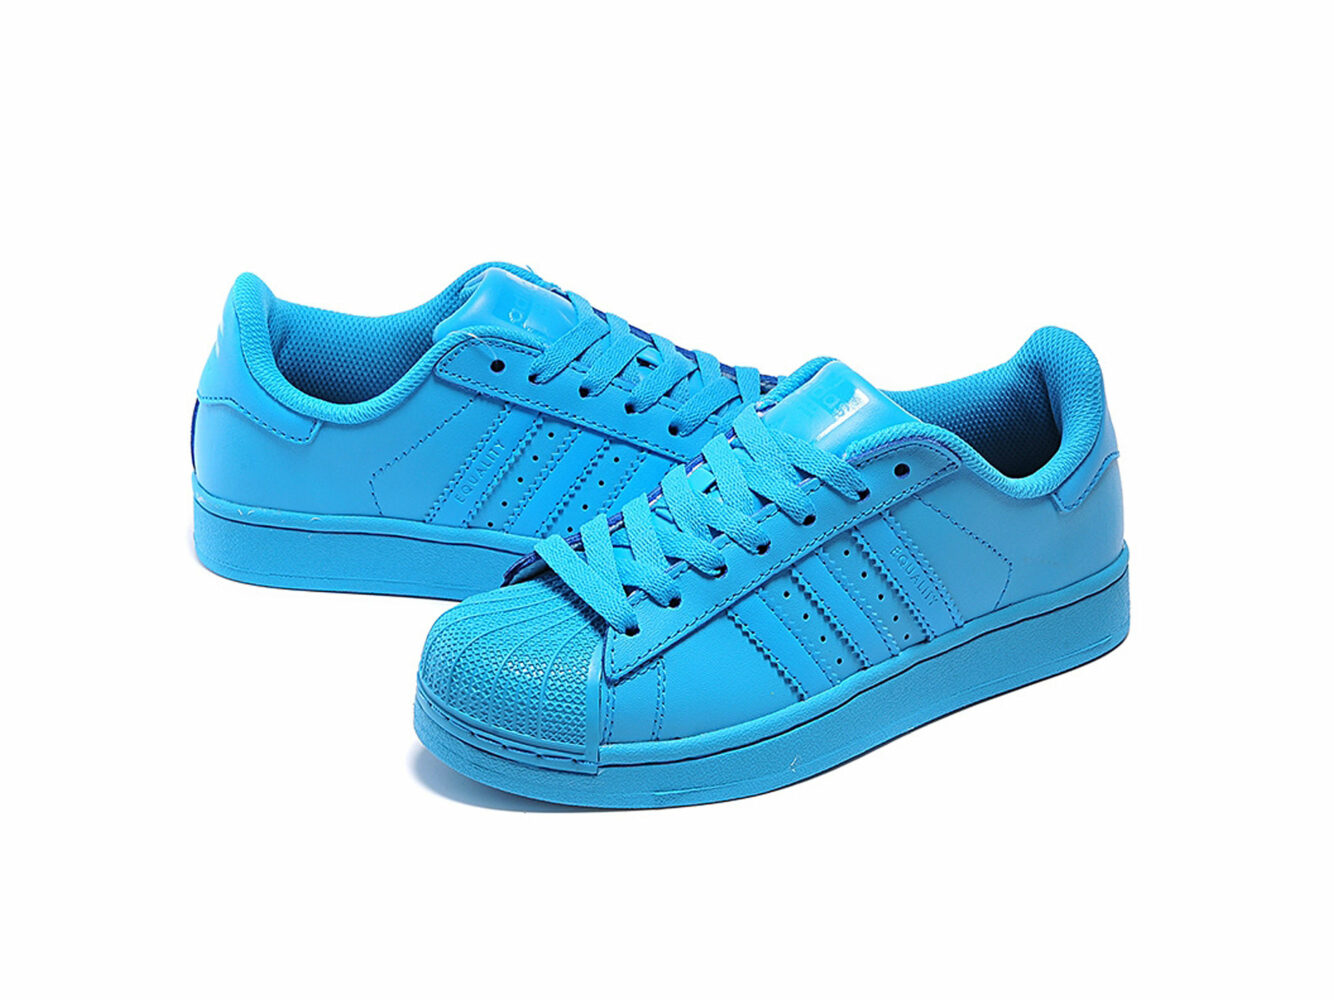 adidas superstar supercolor by Pharrell Williams blue